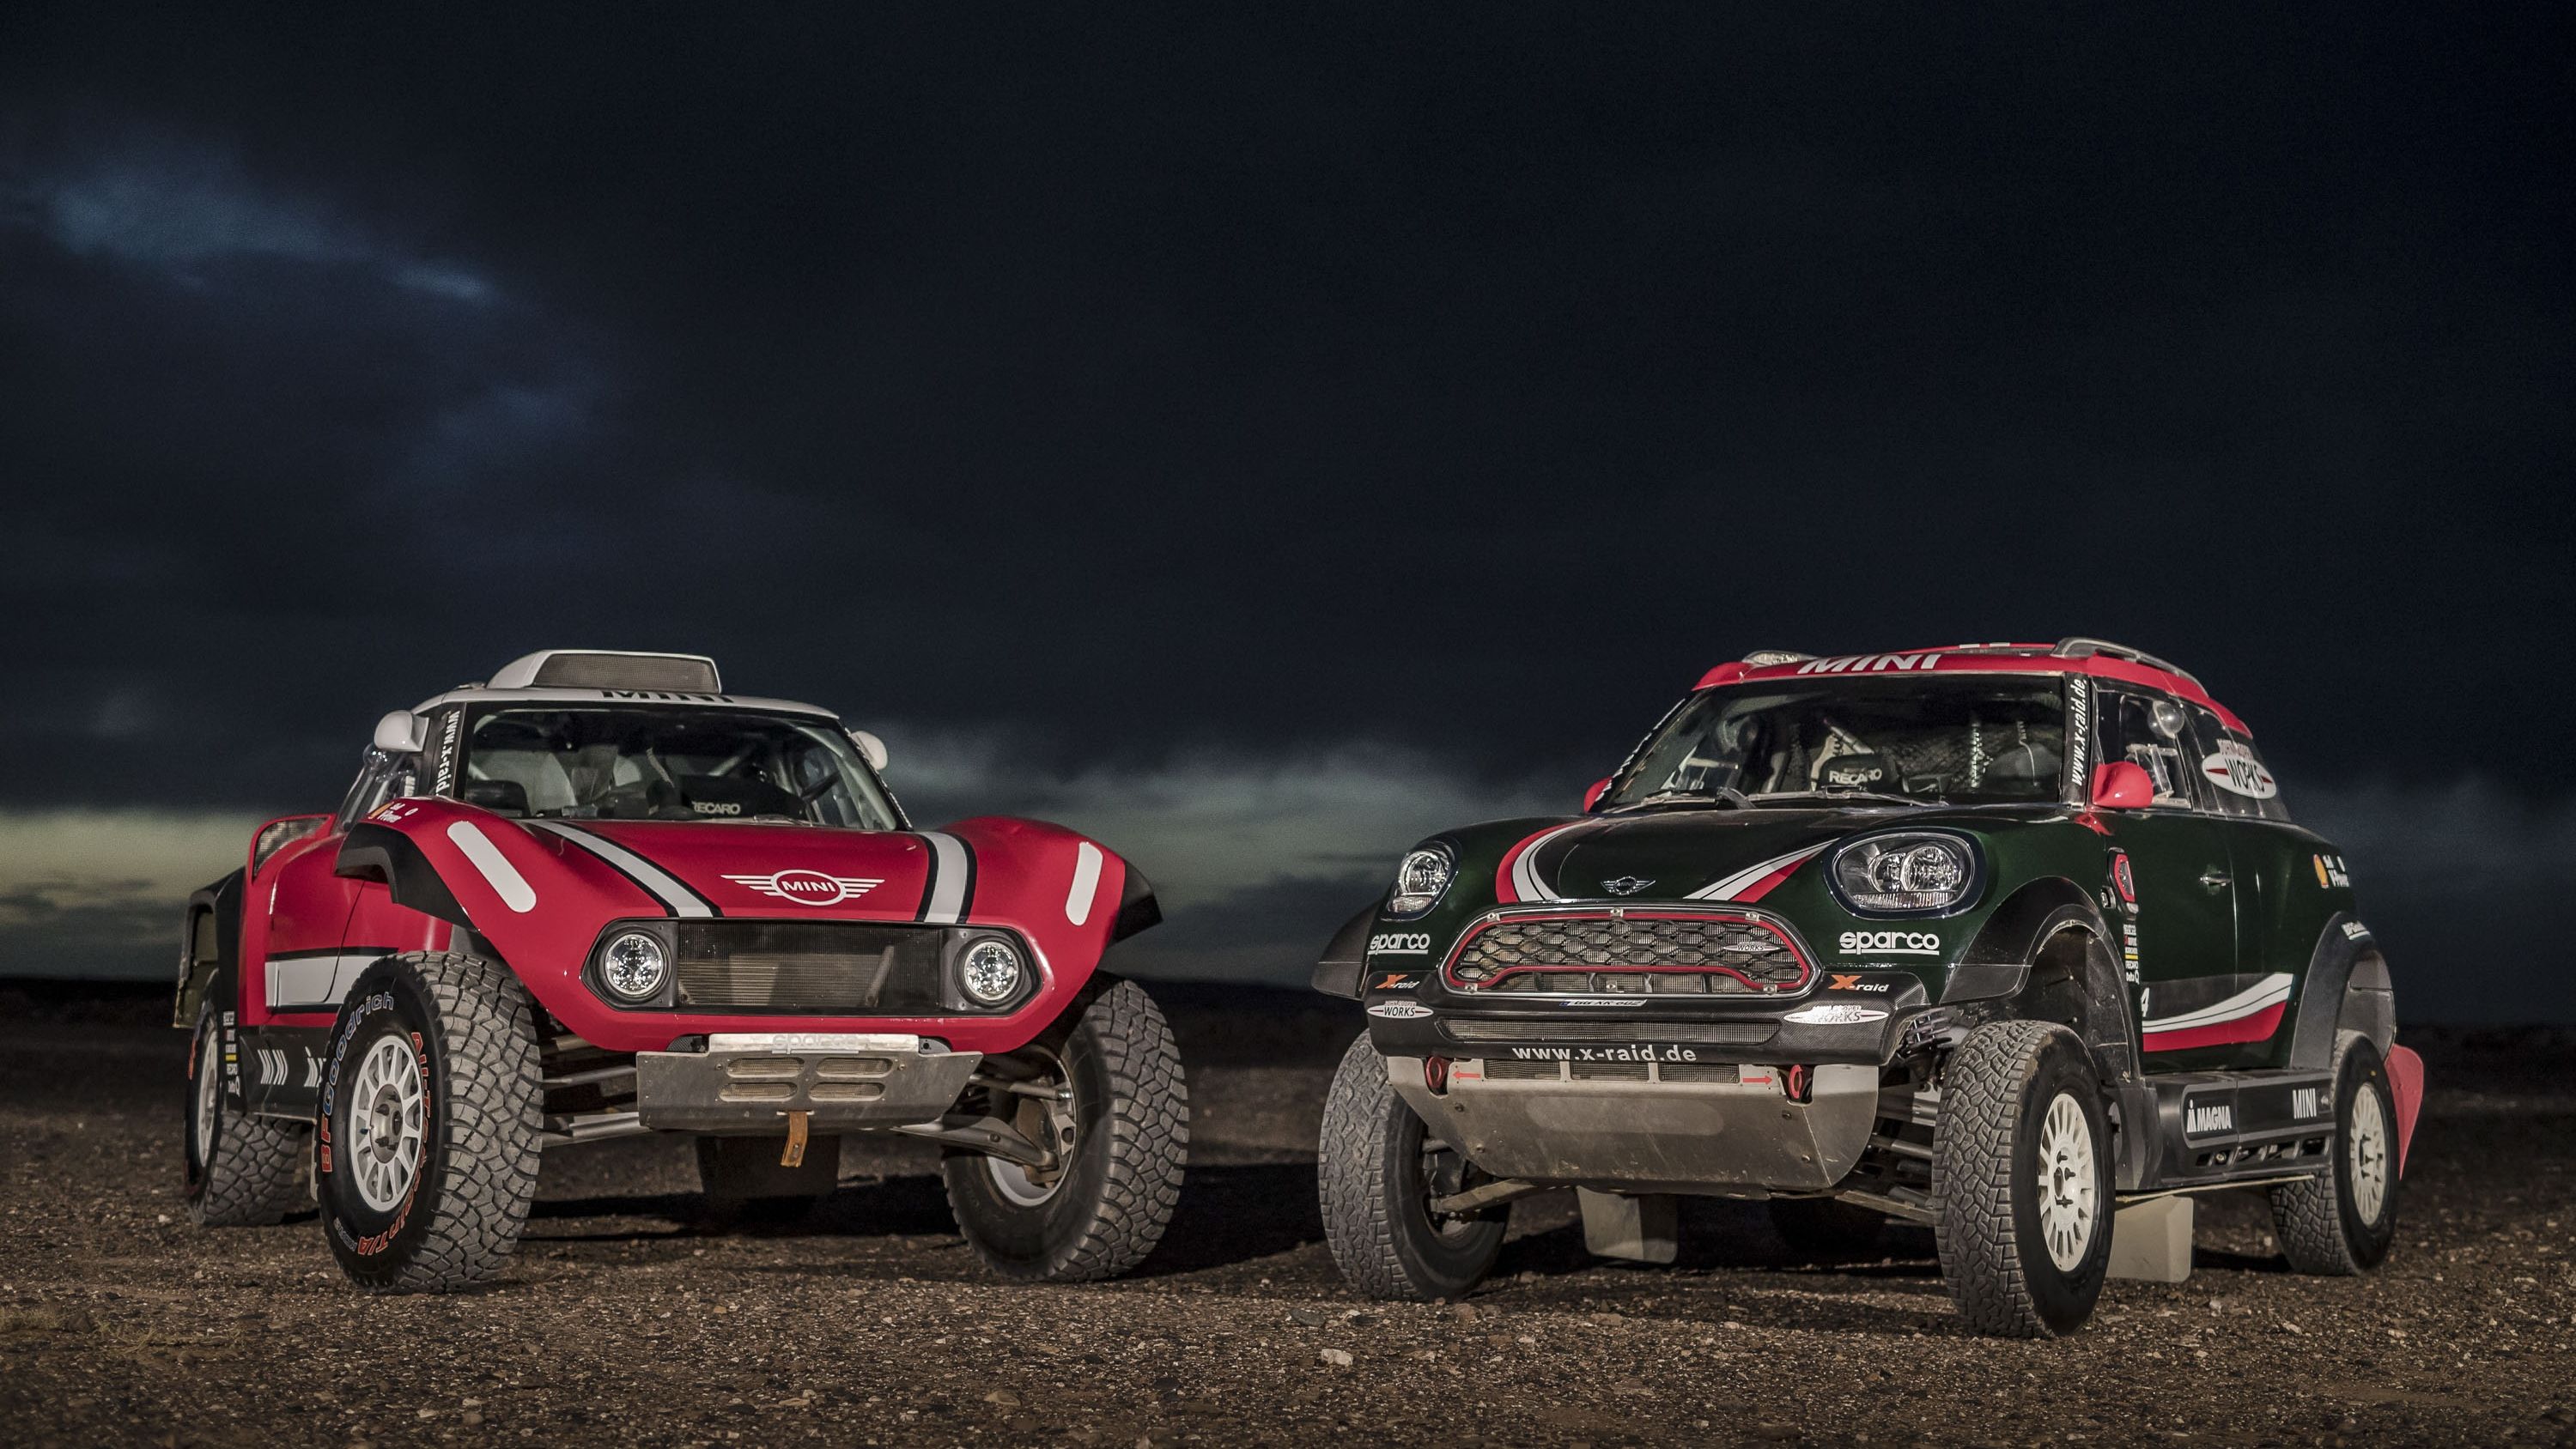 Mini will attack Dakar with new 2WD John Cooper Works Buggy